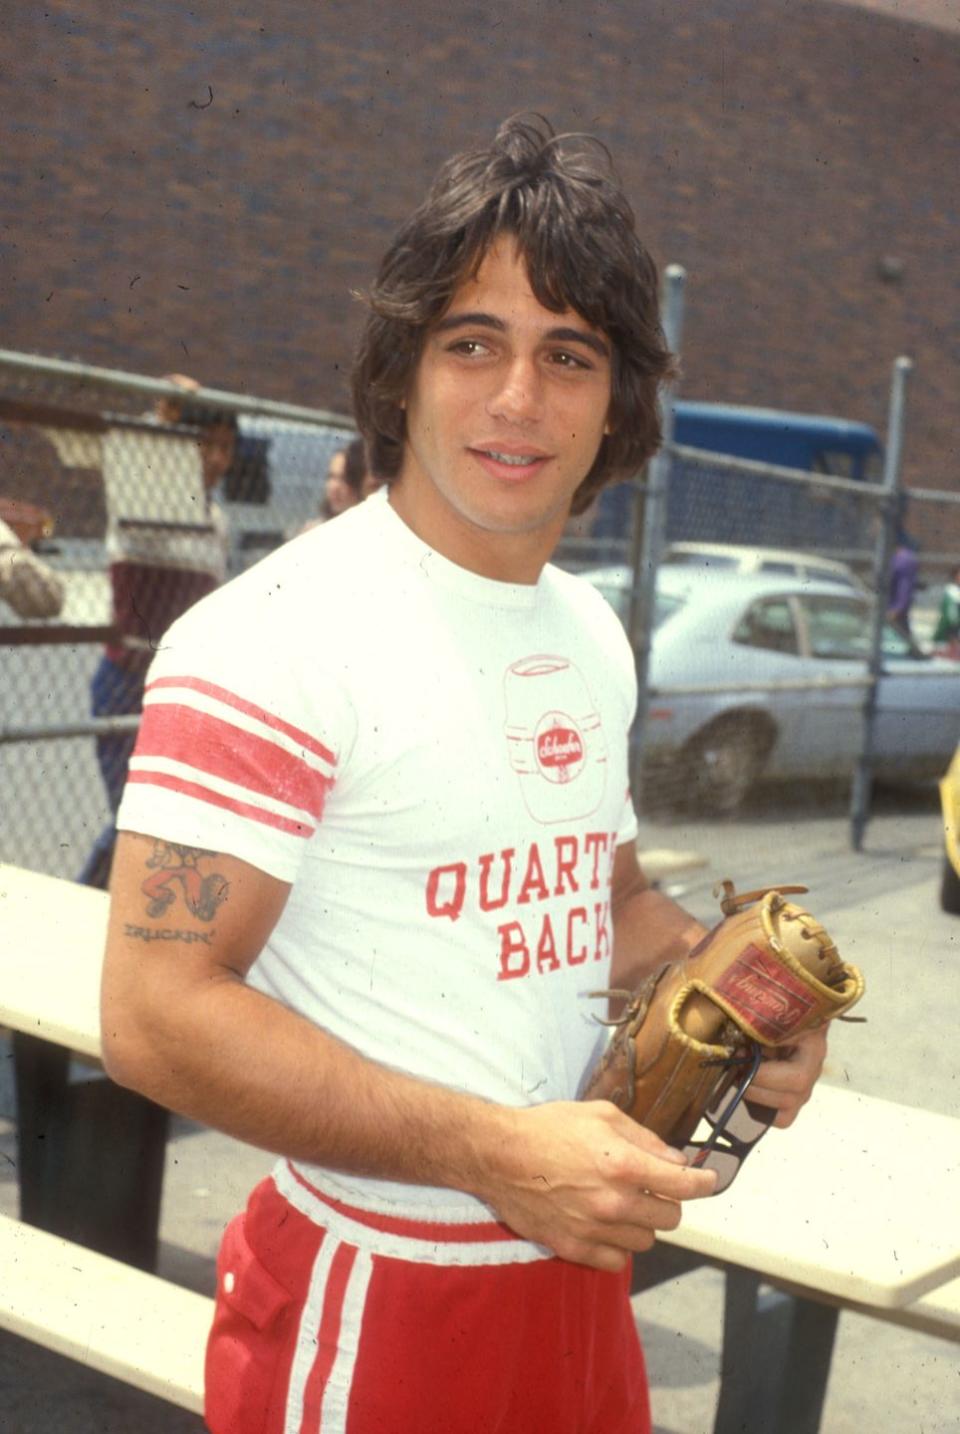 <p>Though his career started in the '70s with <em>Taxi</em>, Tony Danza's biggest decade by far was the '80s. He continued costarring in <em>Taxi</em> until 1983, appeared in several movies <em>and</em><span class="redactor-invisible-space"> began starring on <em>Who's The Boss?</em><span class="redactor-invisible-space">, the beloved sitcom which ran from 1984 all the way until 1992.</span></span></p>